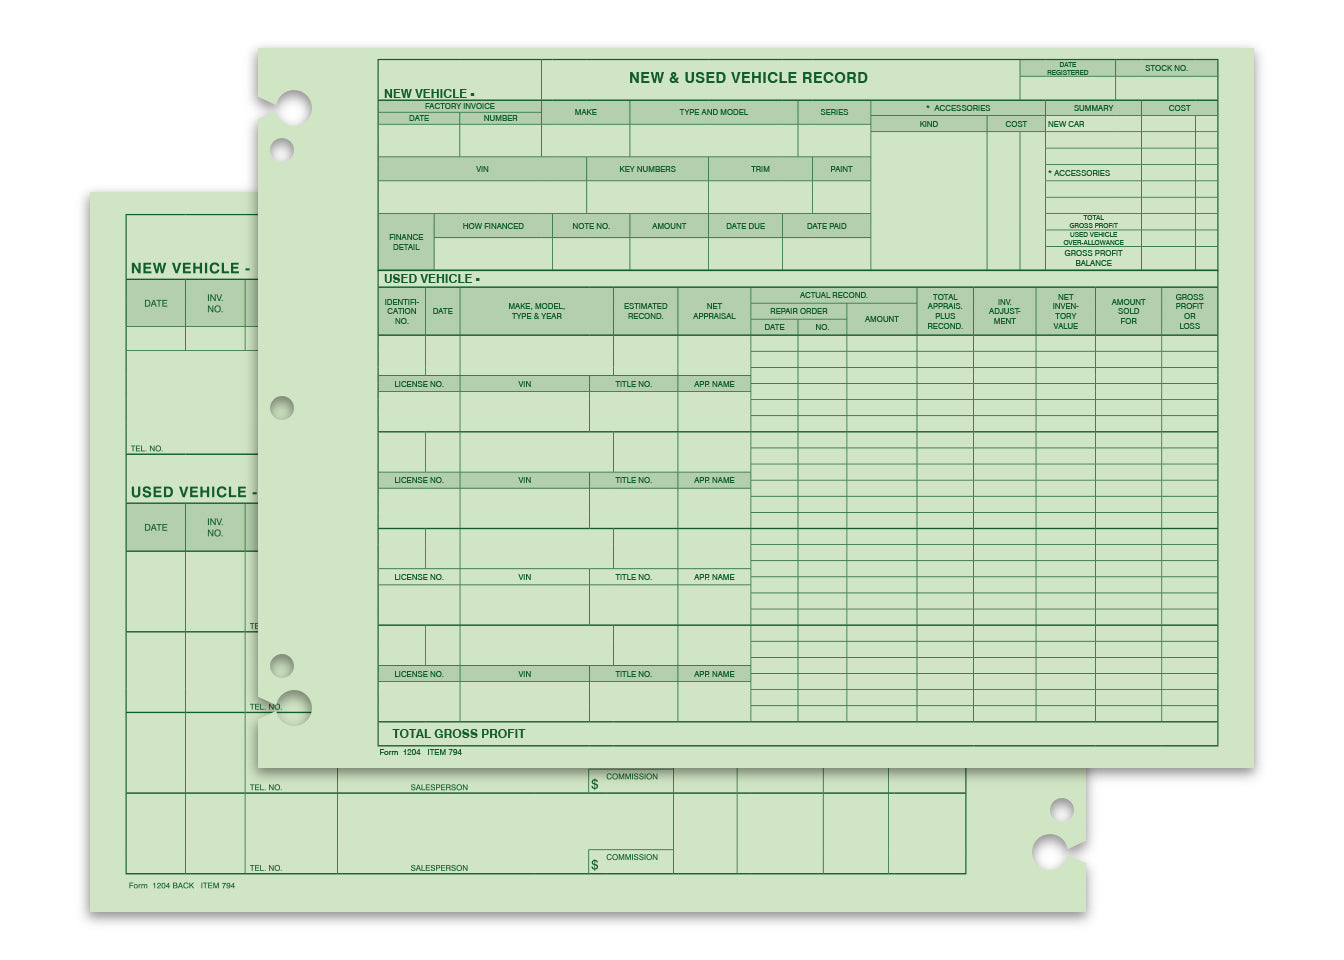 Vehicle Inventory Record, Form 1204